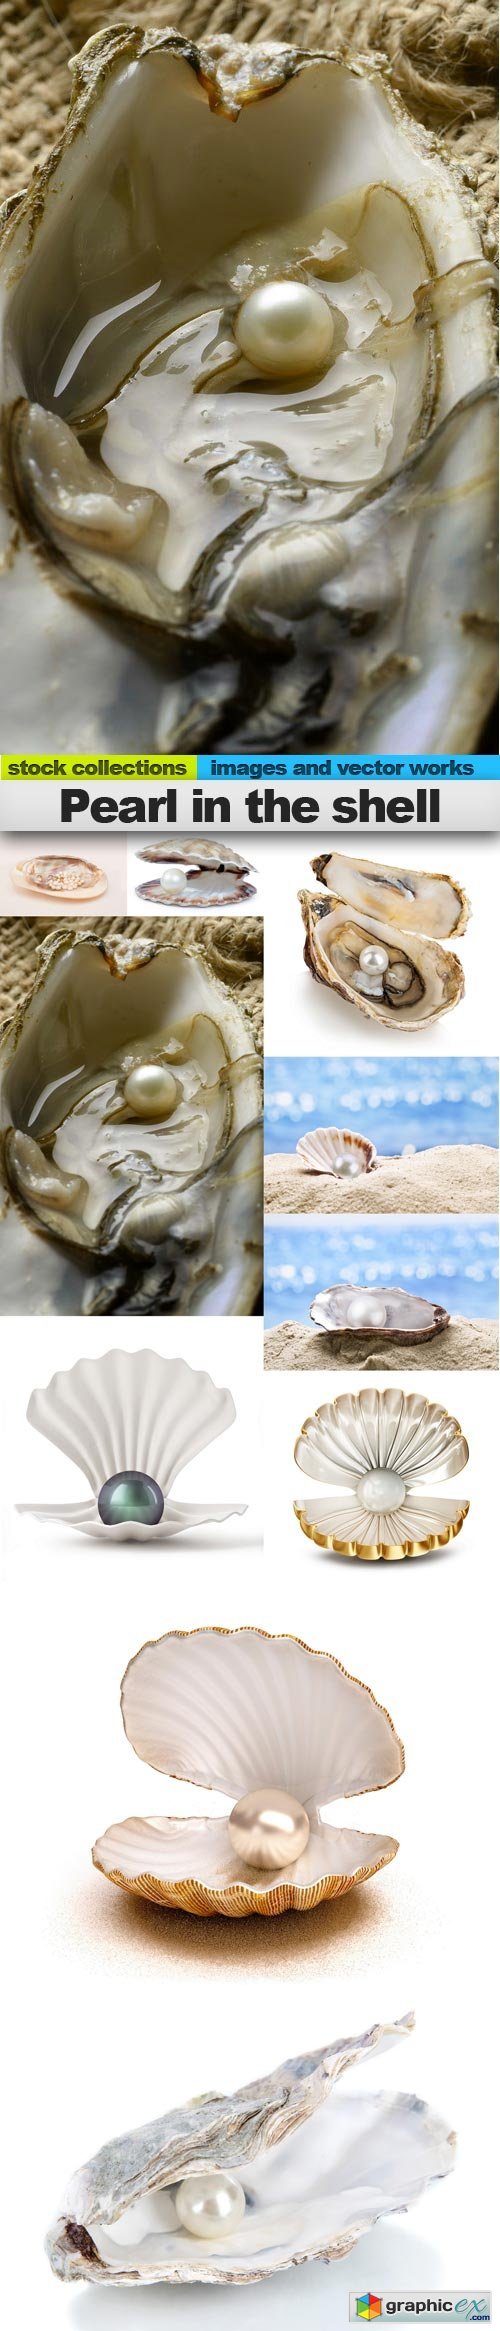 Pearl in the shell, 10 x UHQ JPEG